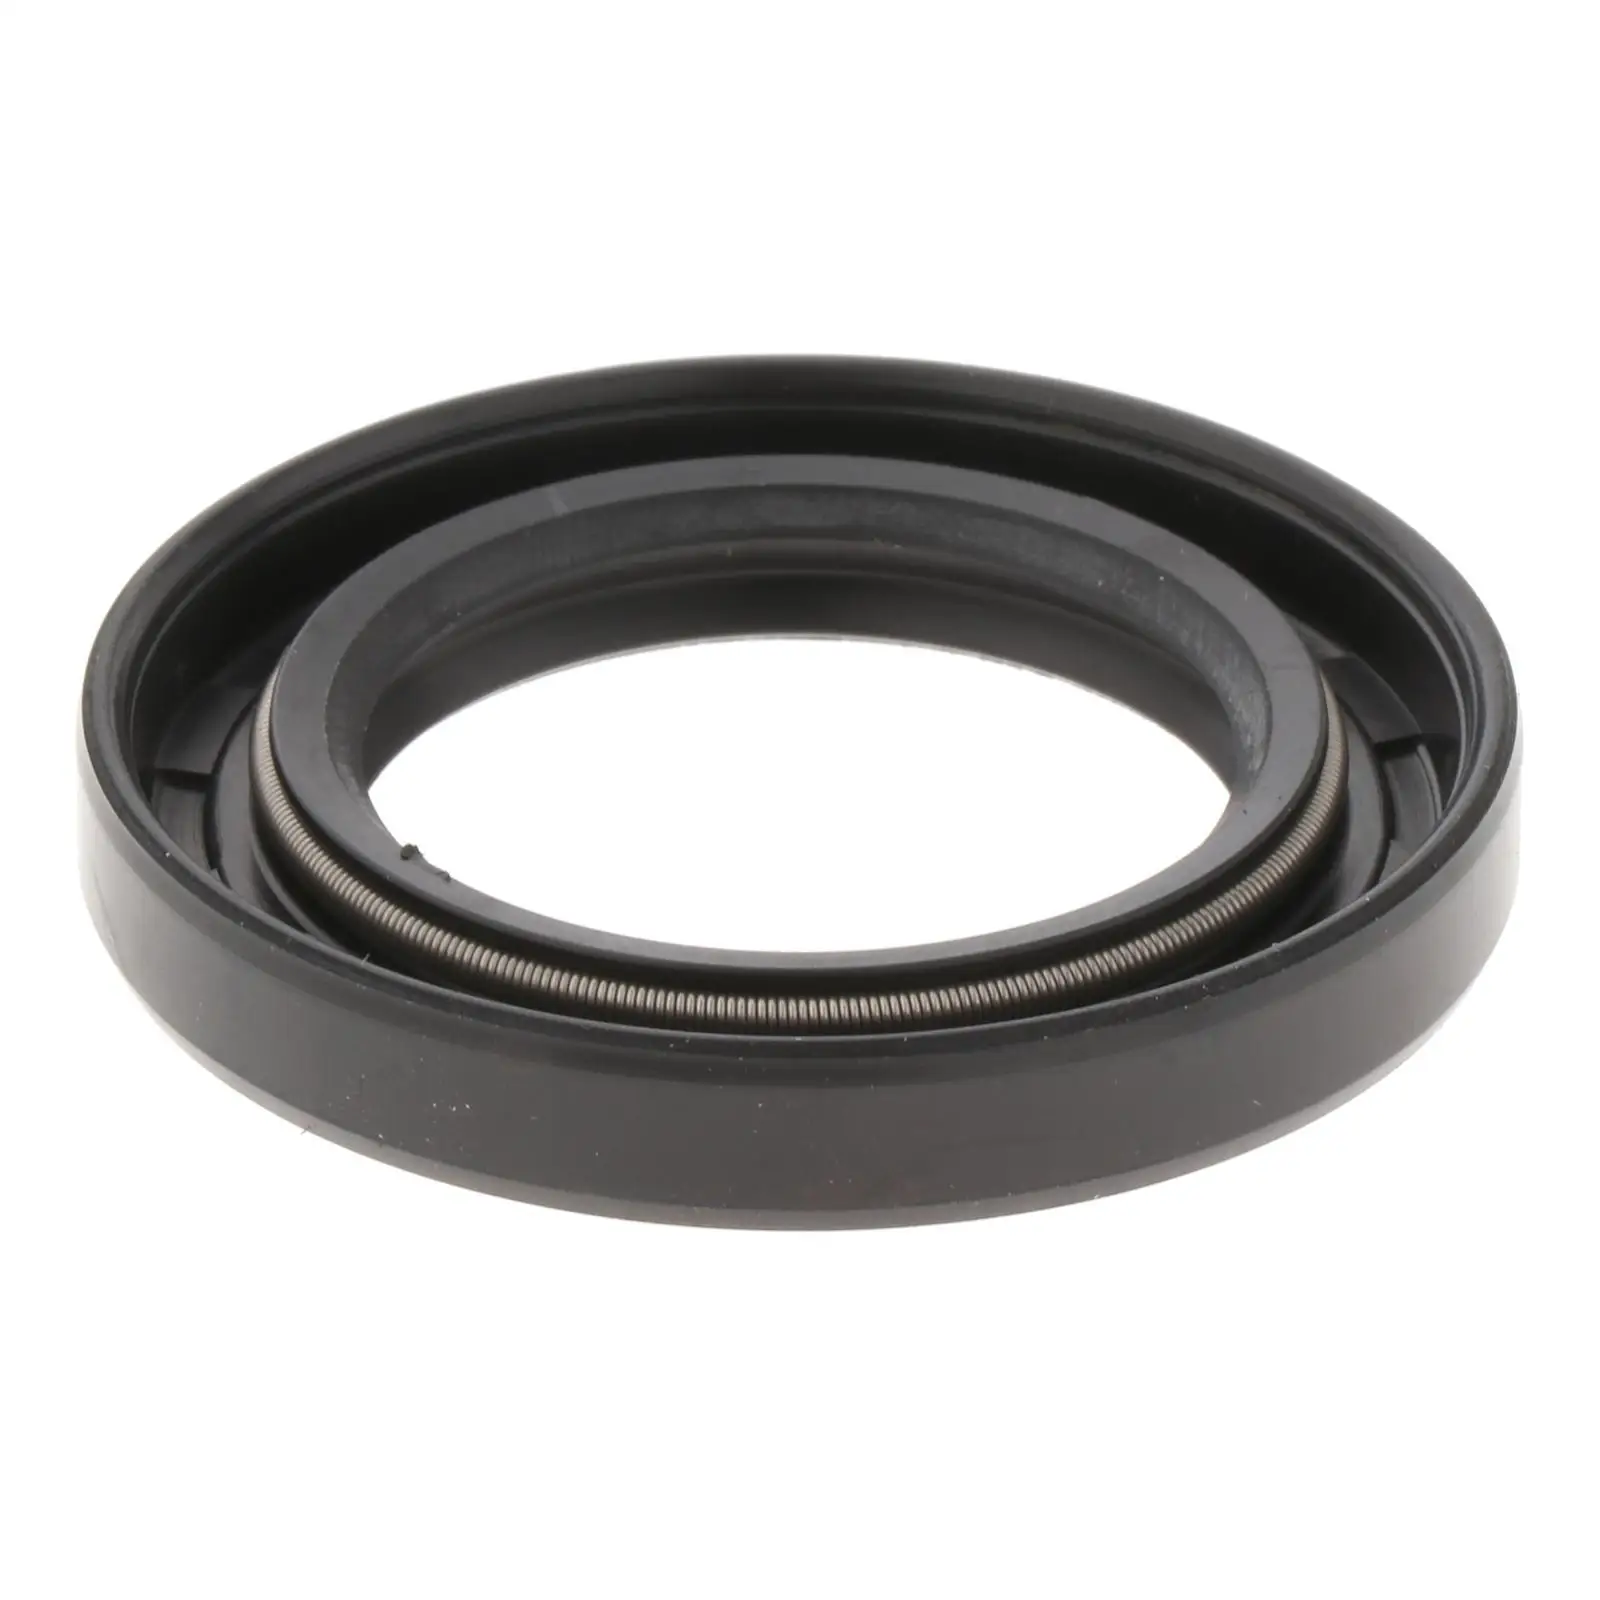 Oil Seal, 93102-30M23, Fits for Yamaha Outboard Motor Durable Replaces High Performance